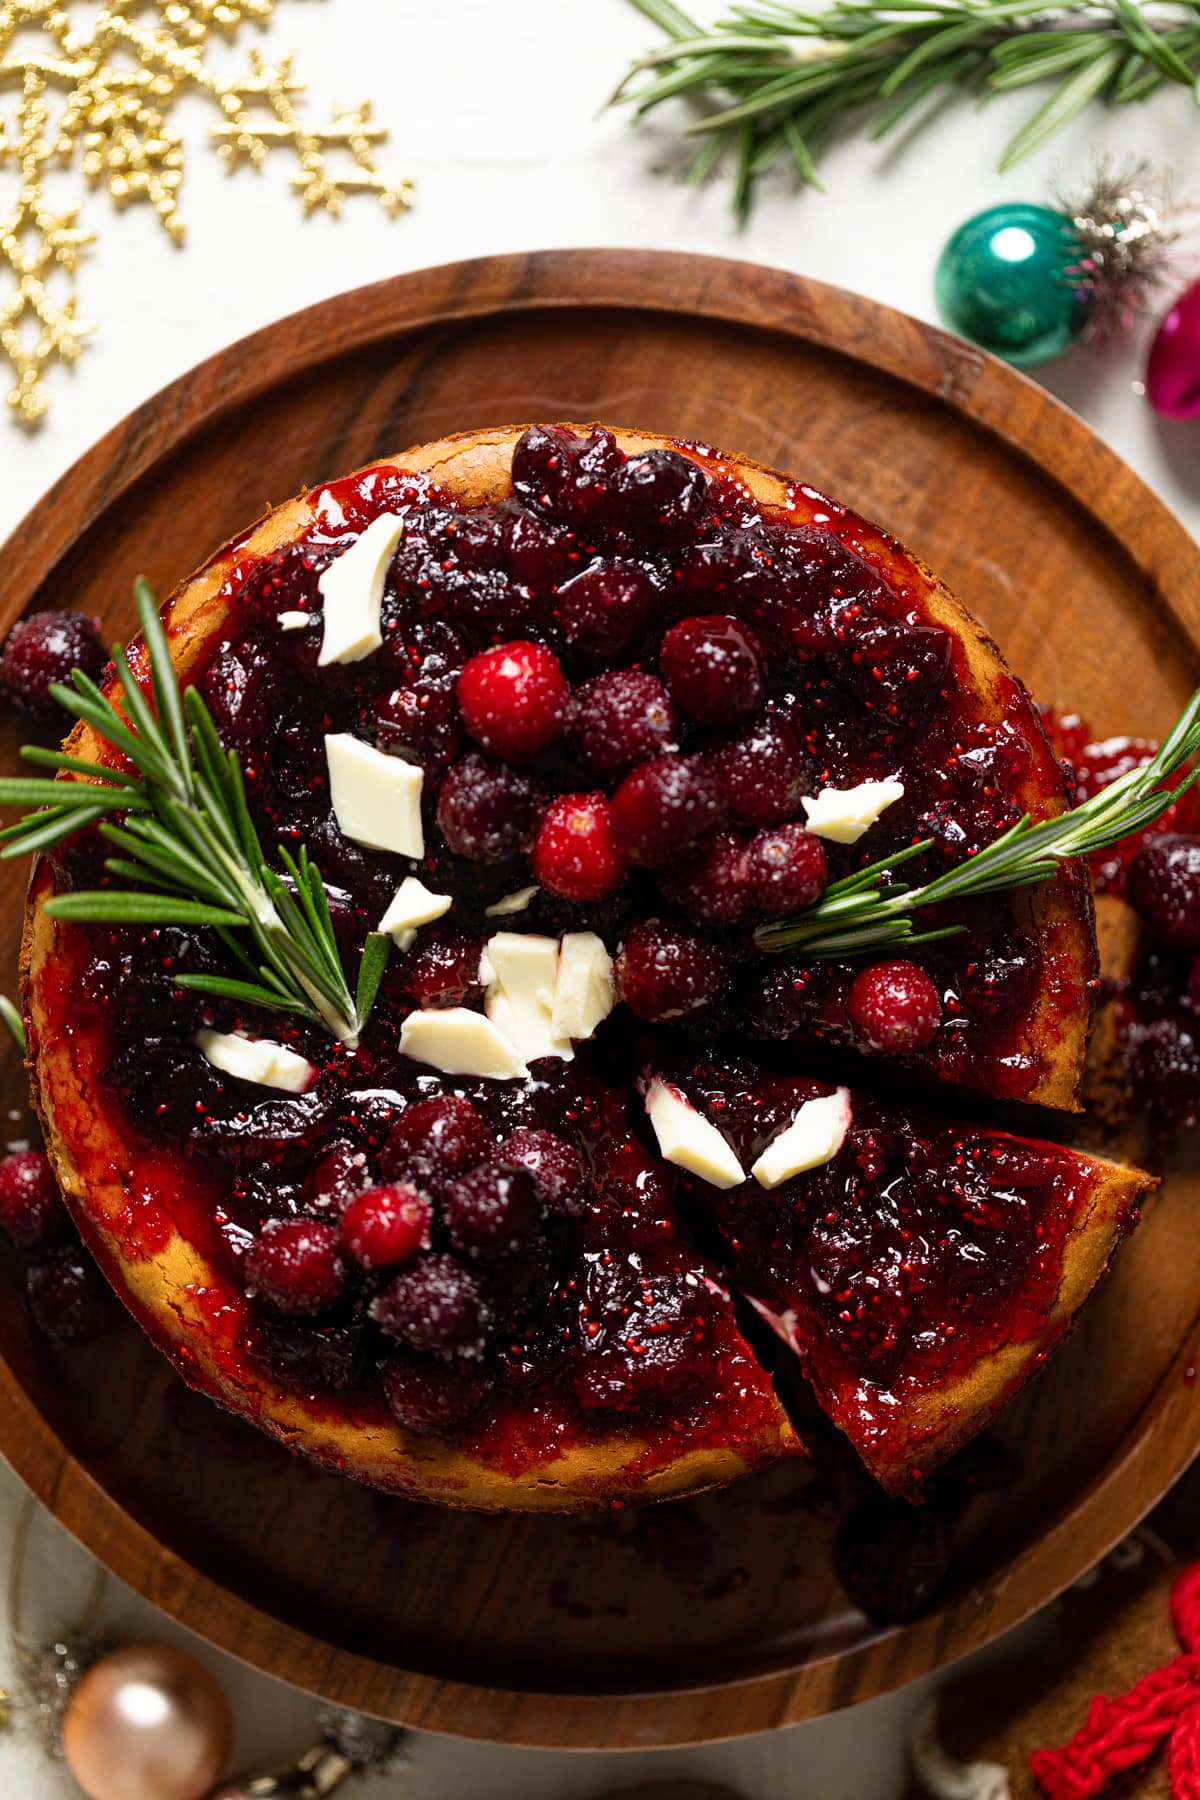 White Chocolate Cheesecake with Cranberries with one slice pulled out